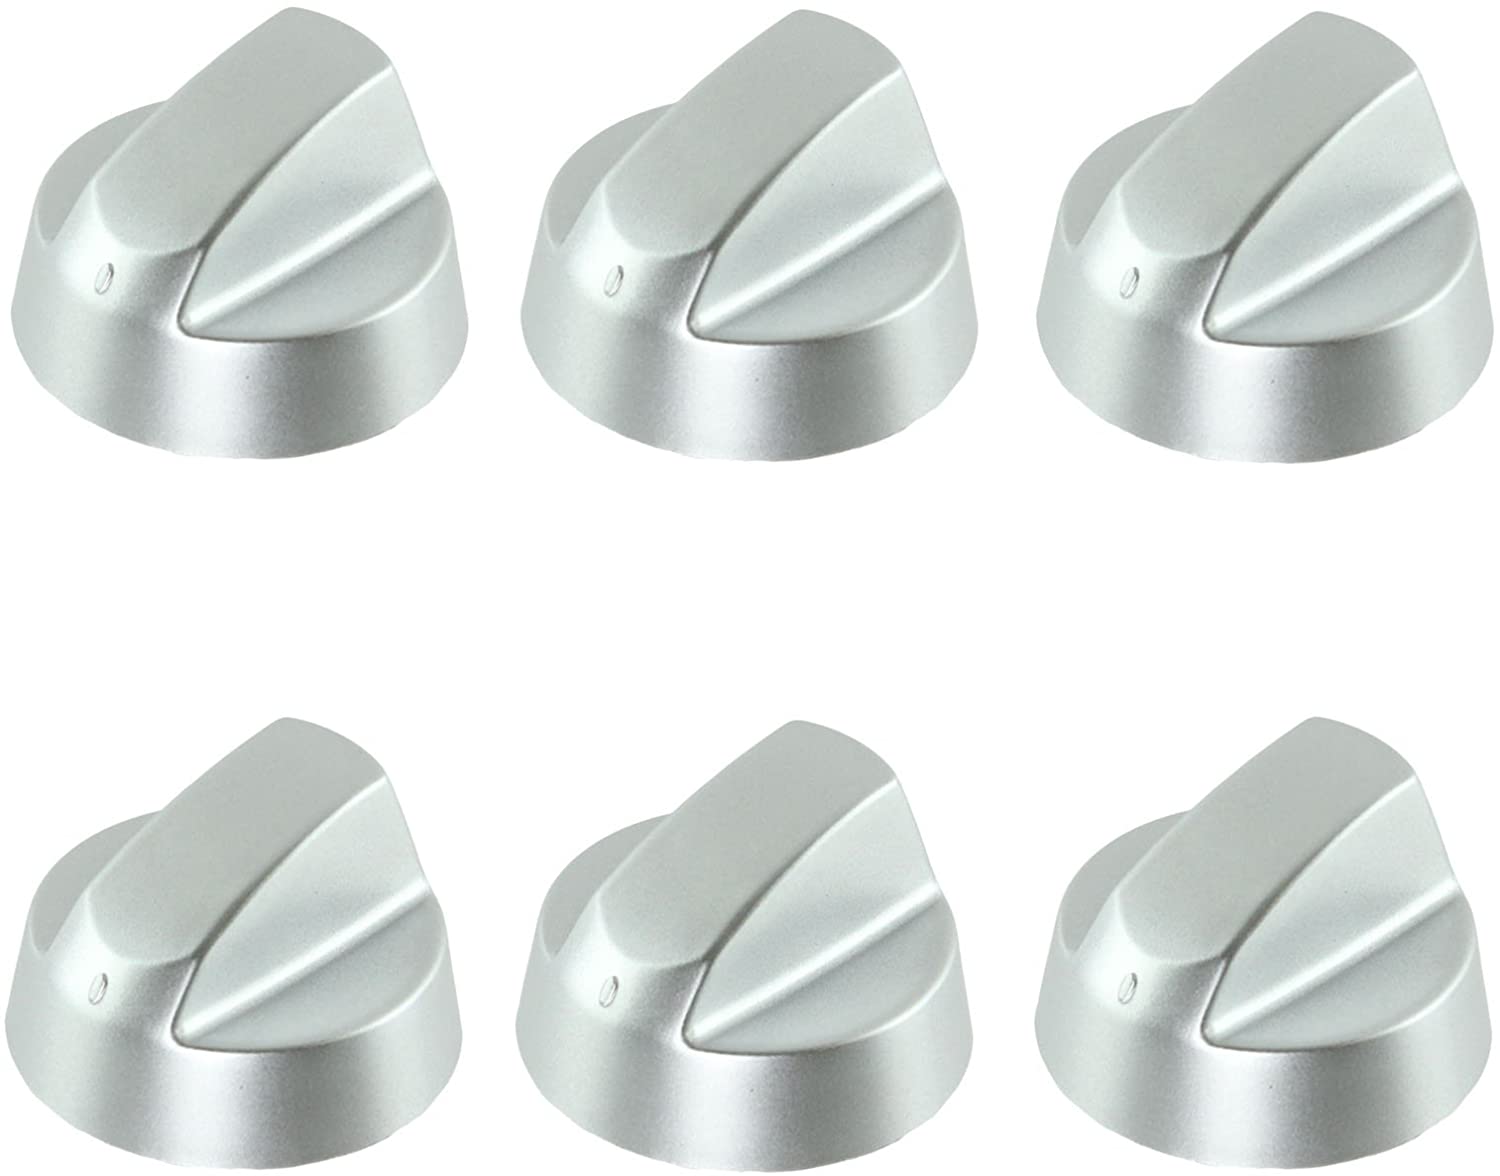 Control Knob Dial & Adaptors for BAUMATIC Oven / Cooker (Silver, Pack of 6)